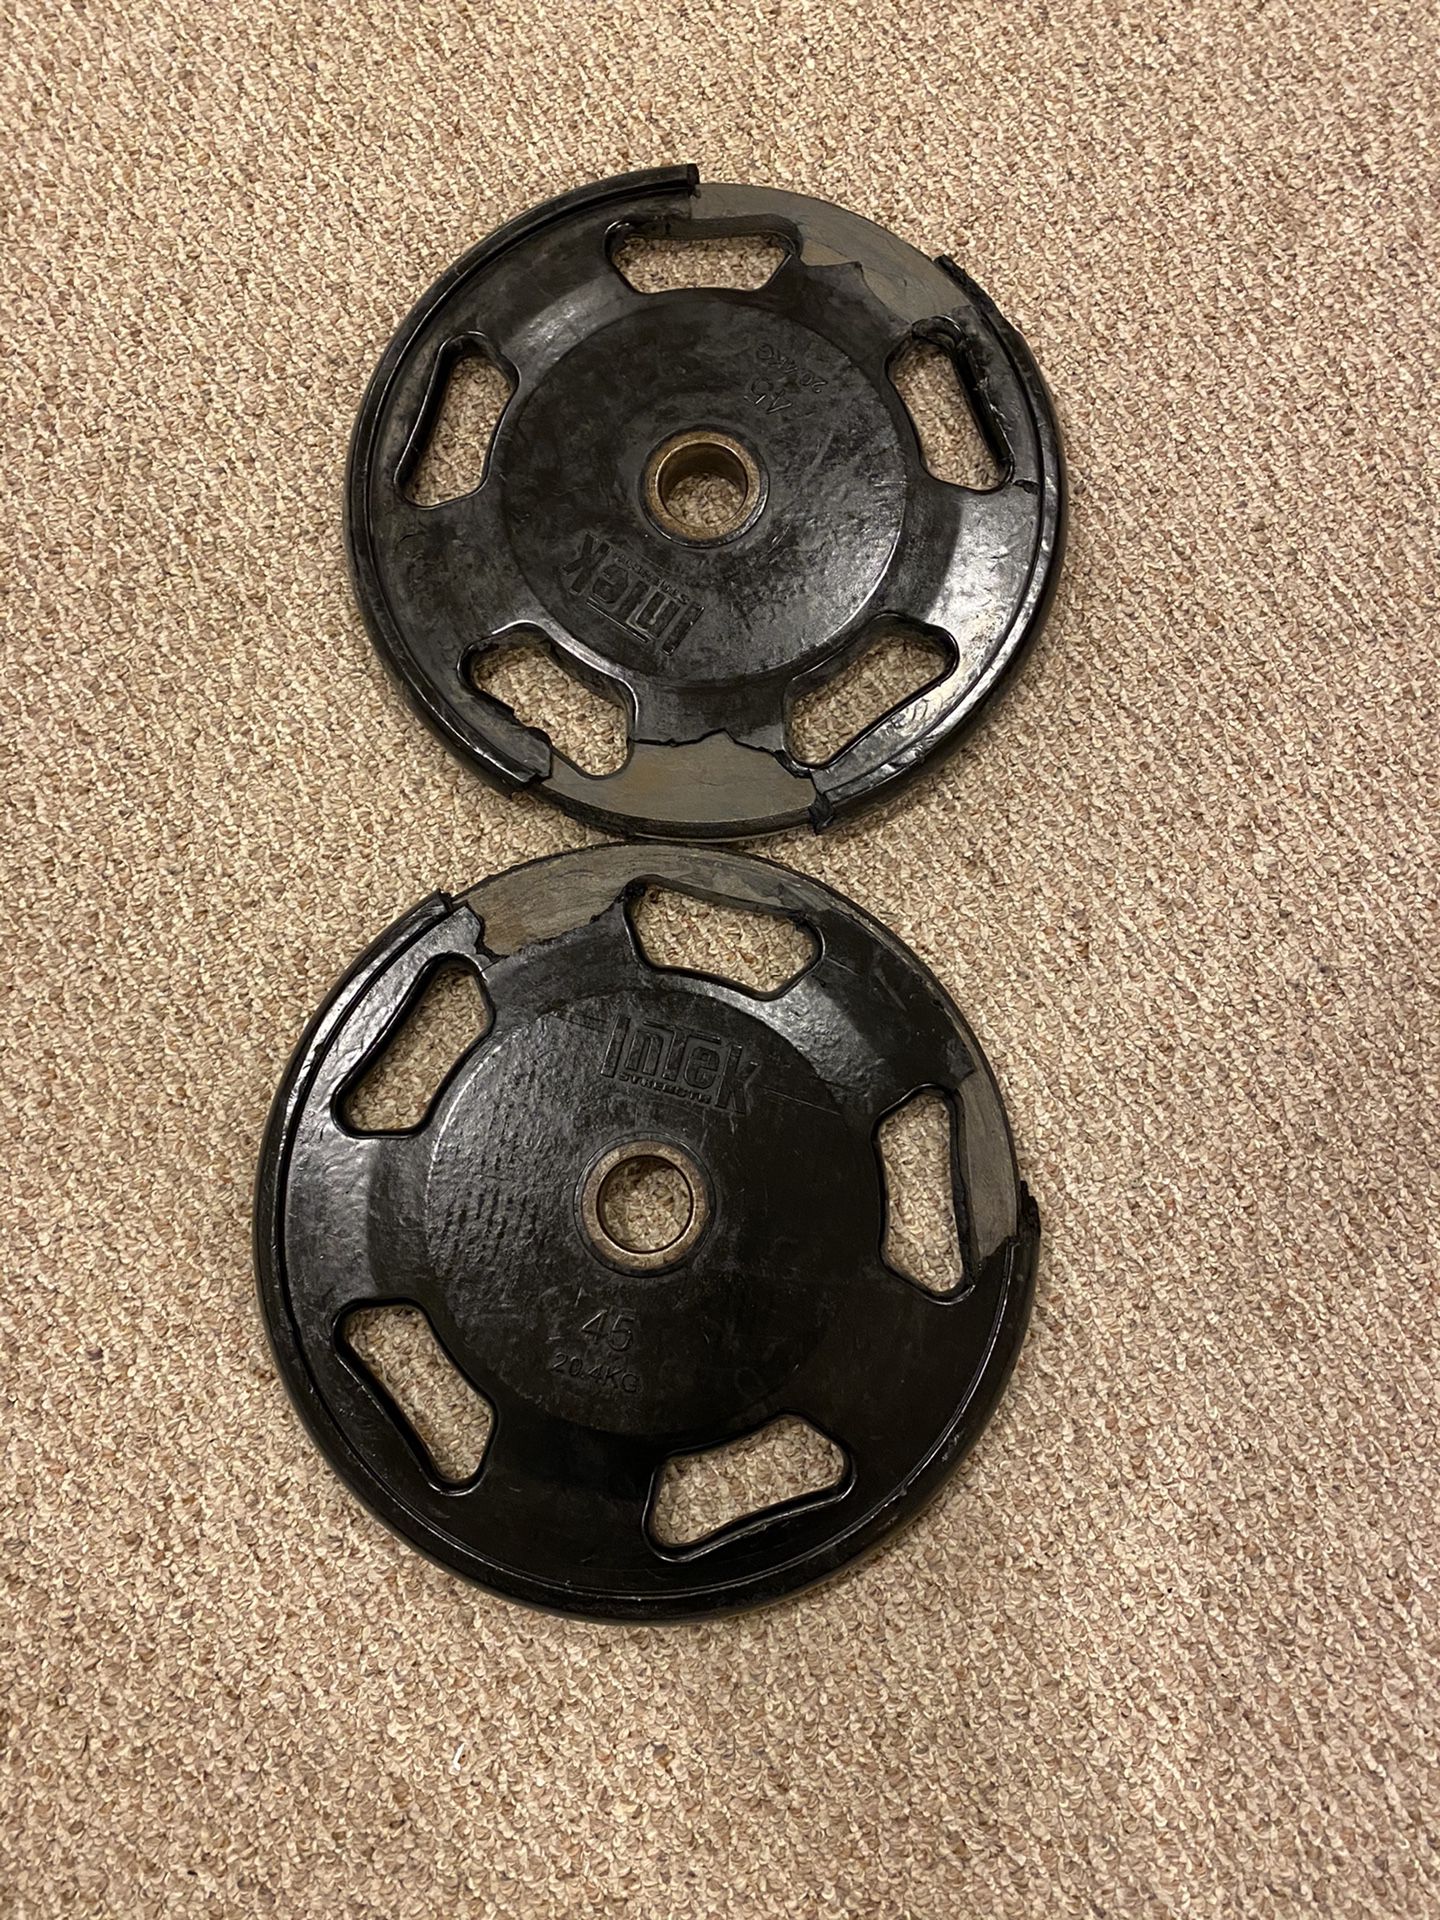 Gym Olympic Barbell Plates